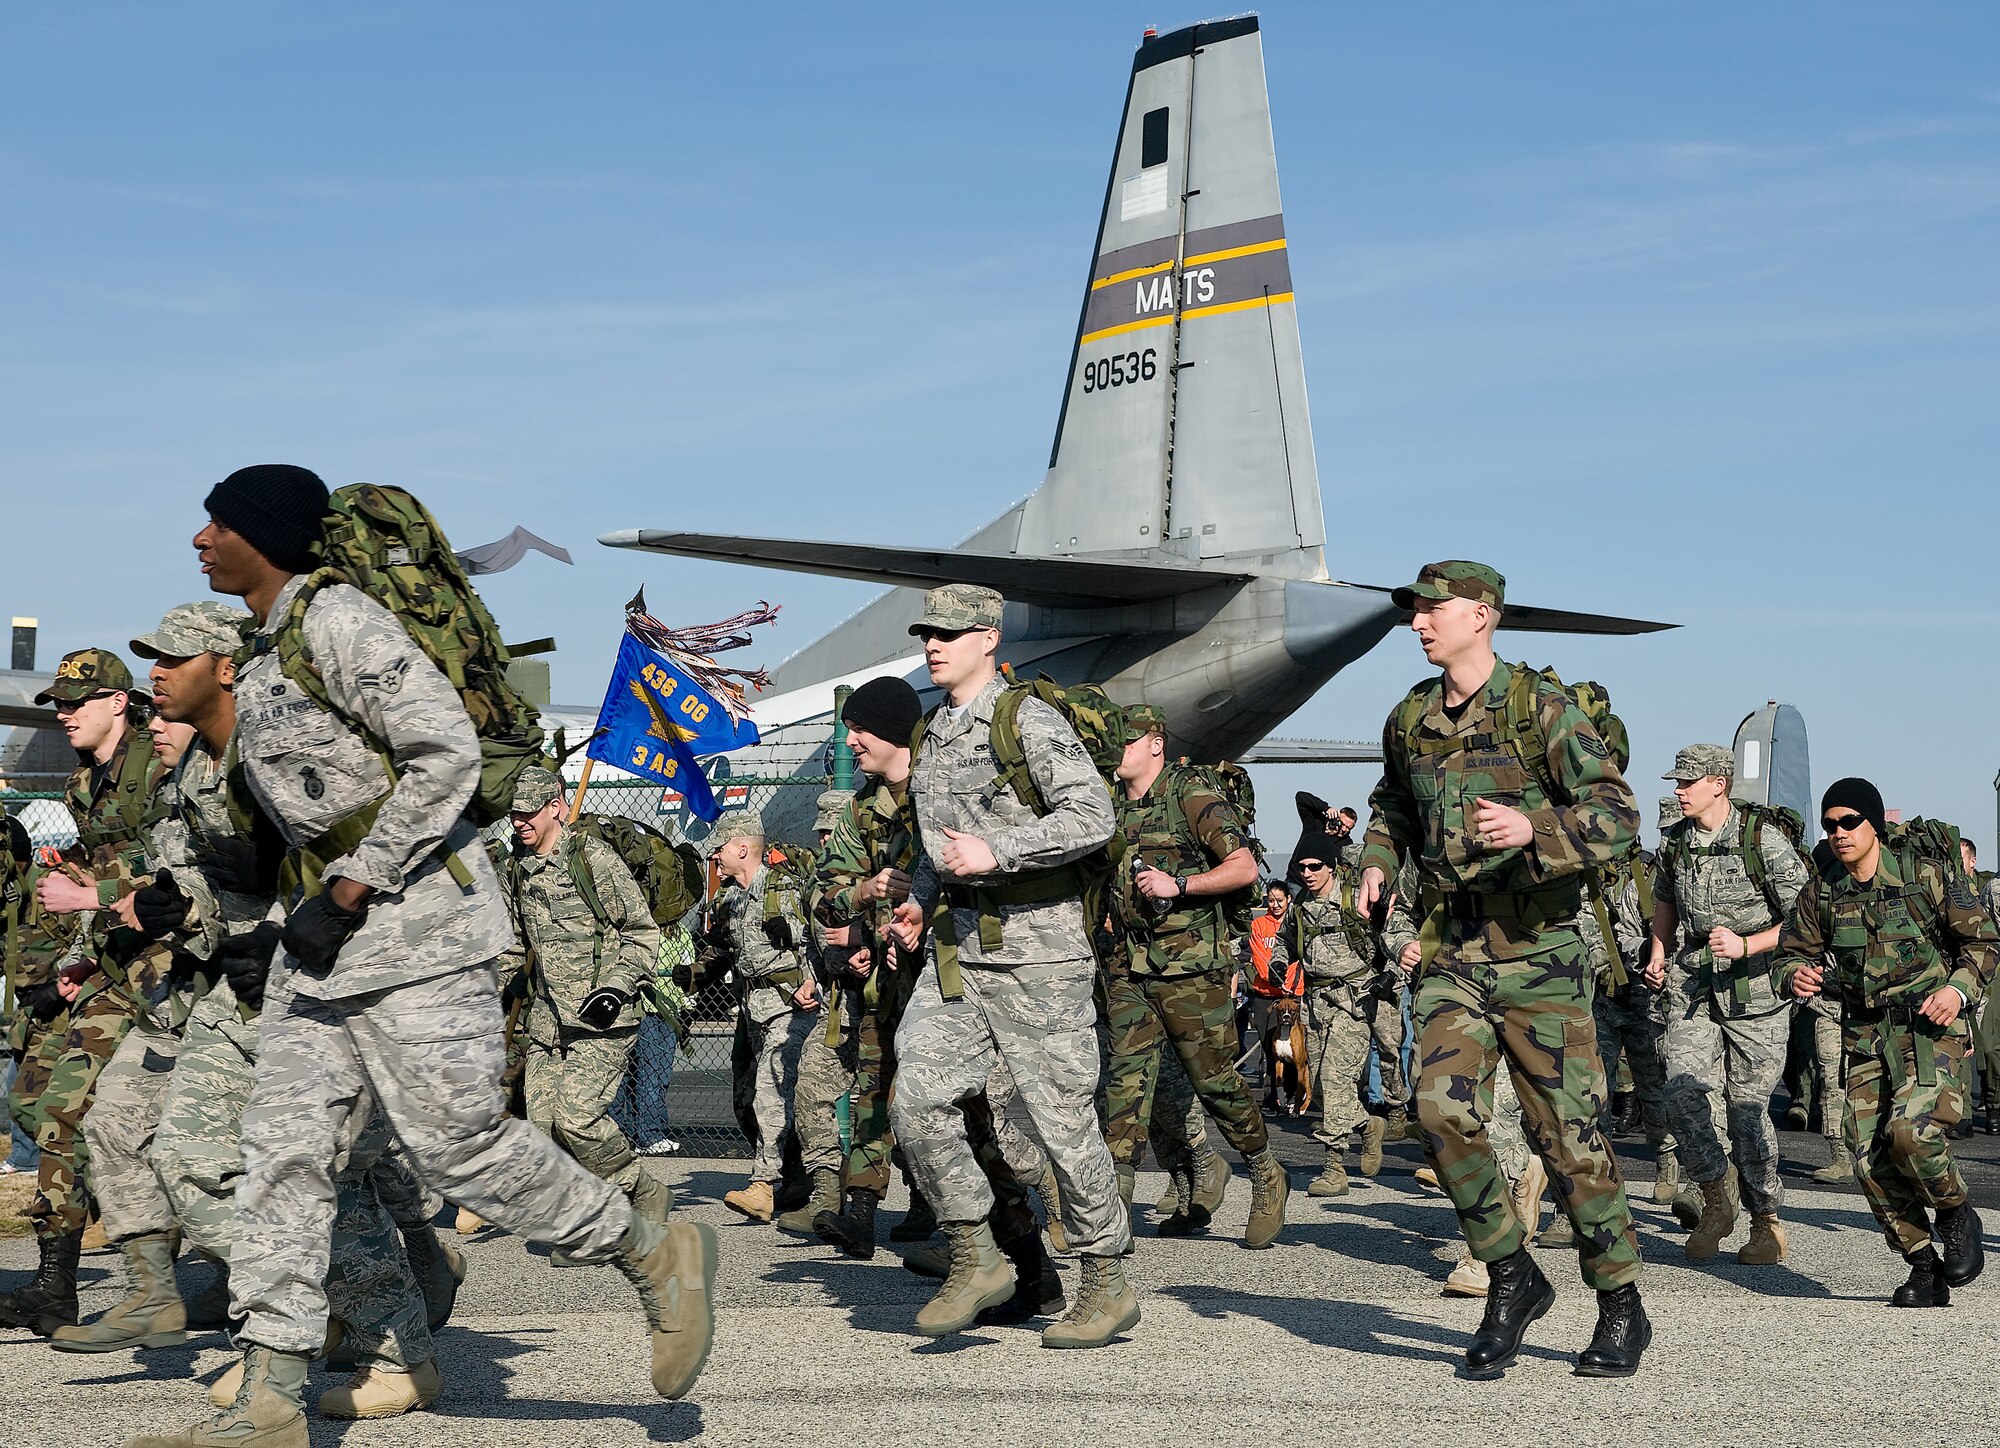 Participants begin the 10-kilometer Ruck March Feb. 21 at the Air Mobility Command Museum. (U.S. Air Force photo/ Roland Balik)